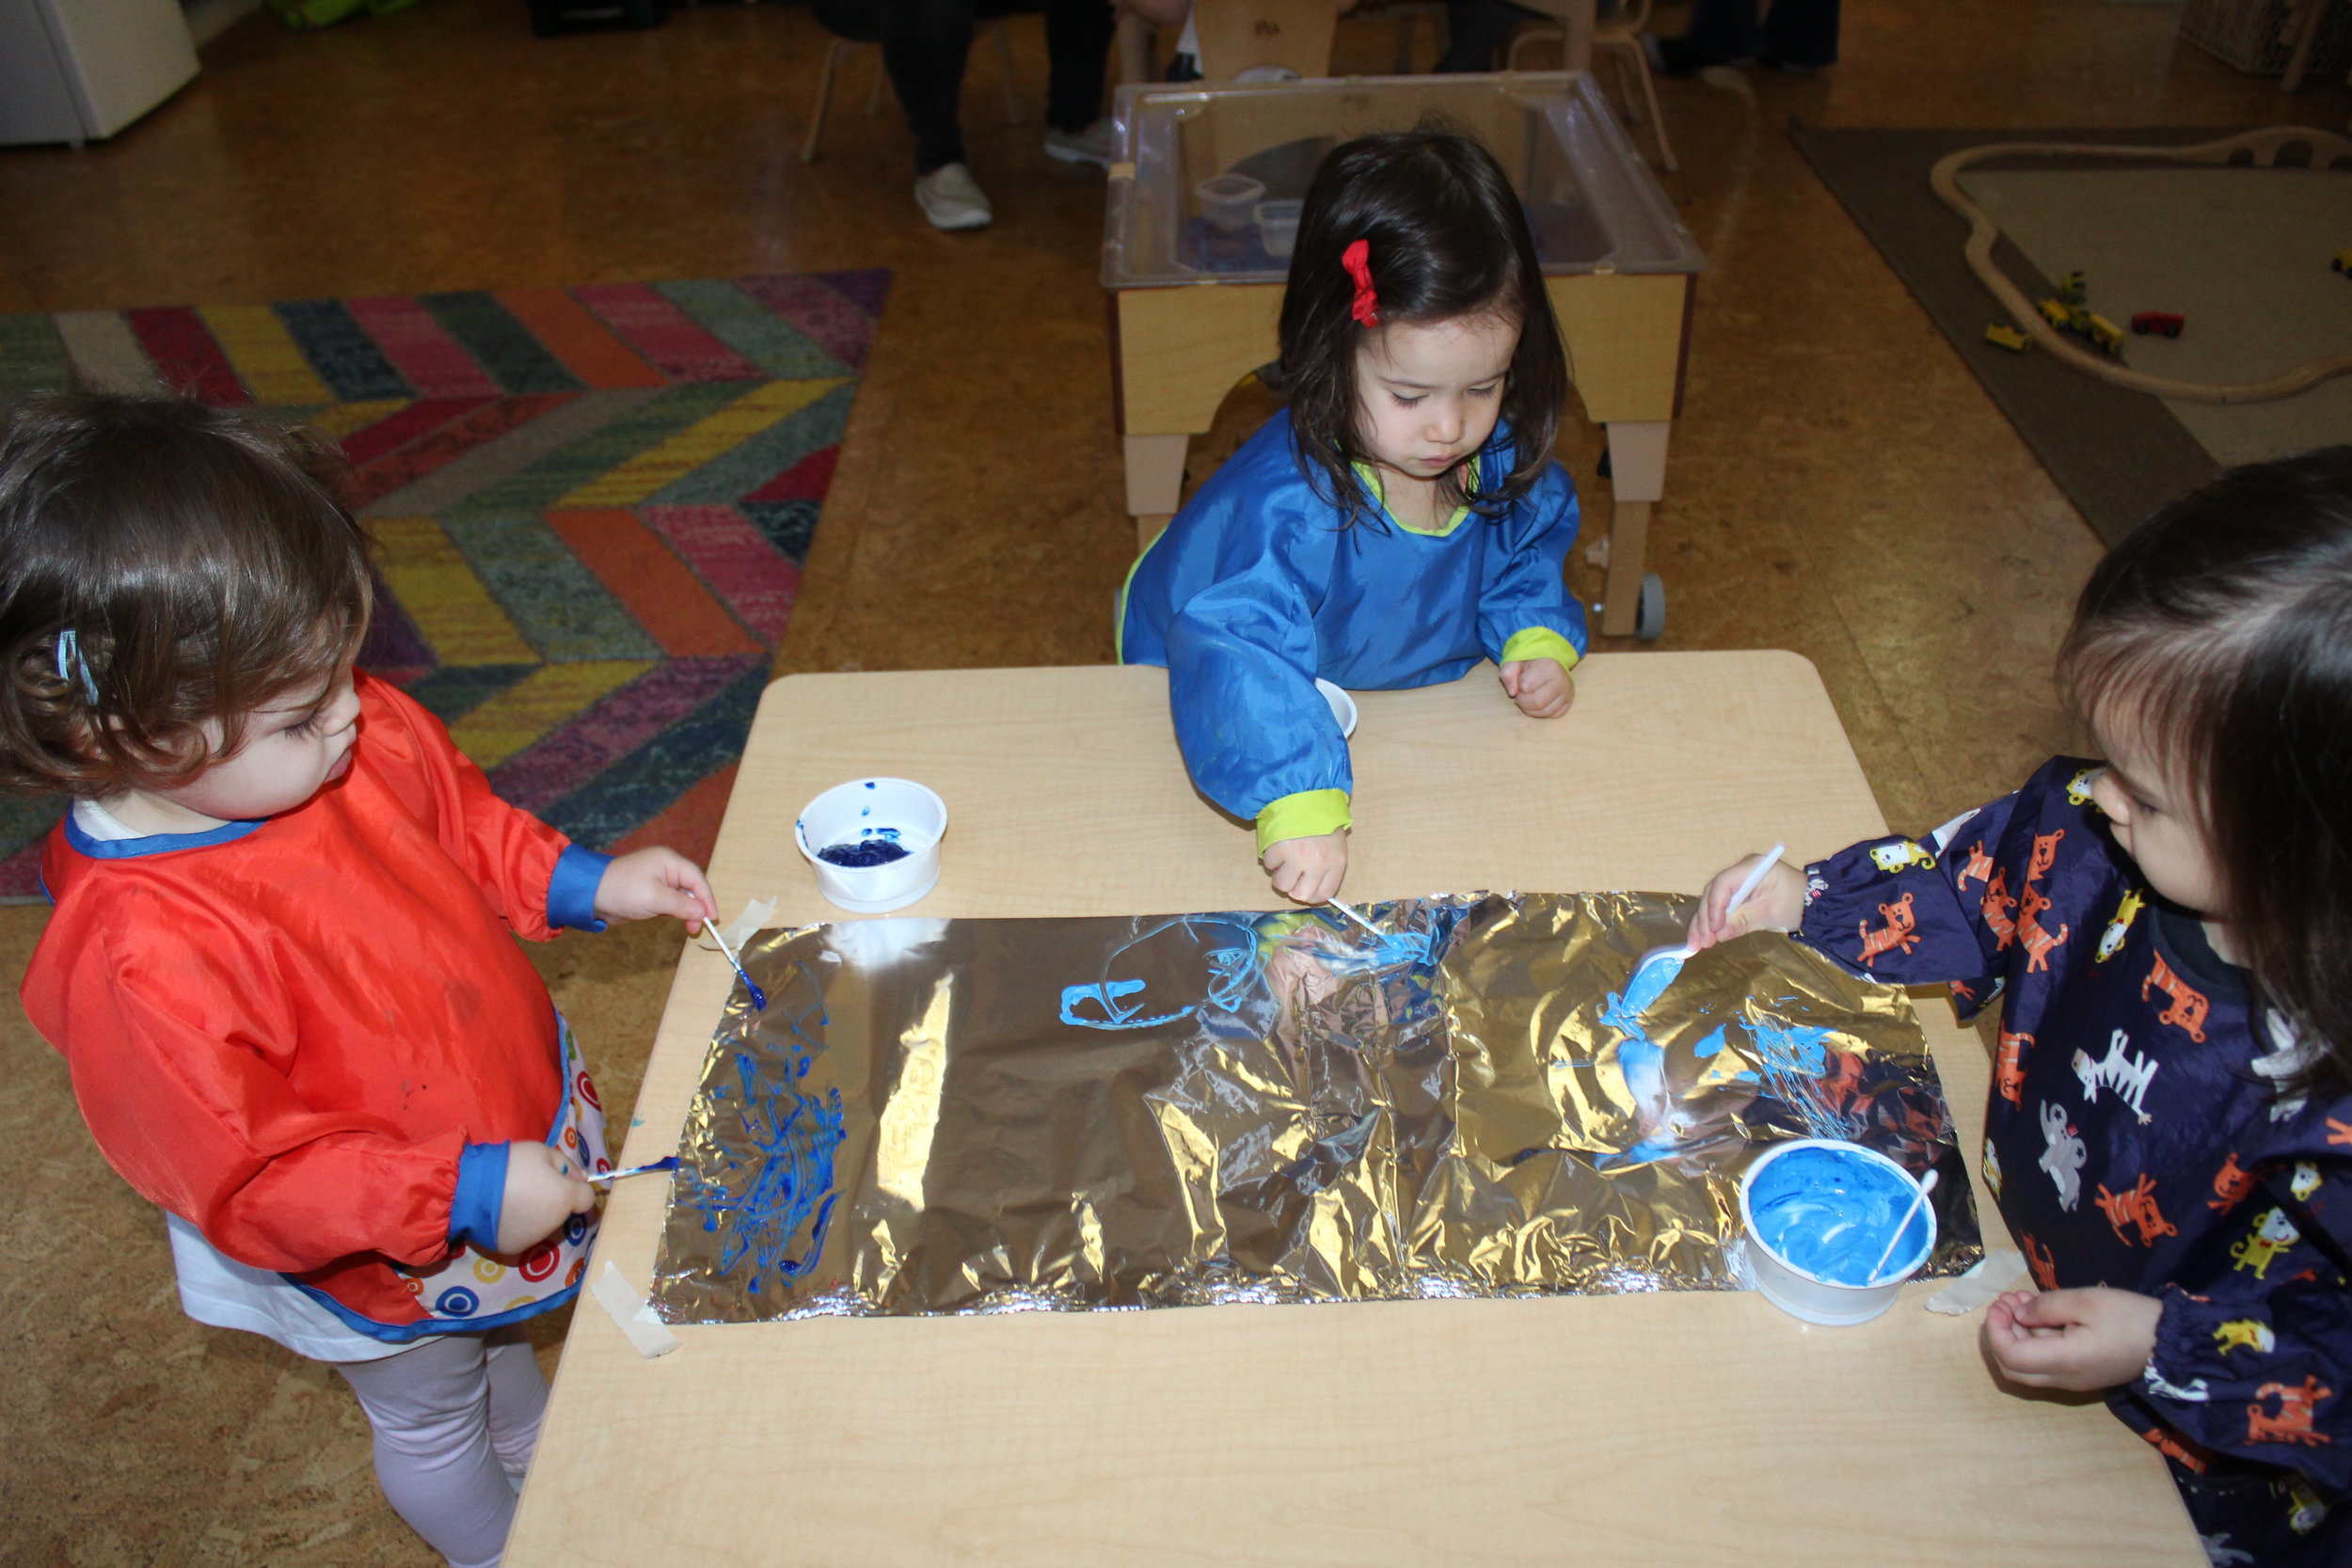  Using tin foil and paint, the children delve into exploring using their hands and fingers. In process art there is no step-by-step instruction, there is no right or wrong way to explore and create. The art is focused on the experience, and on the ex